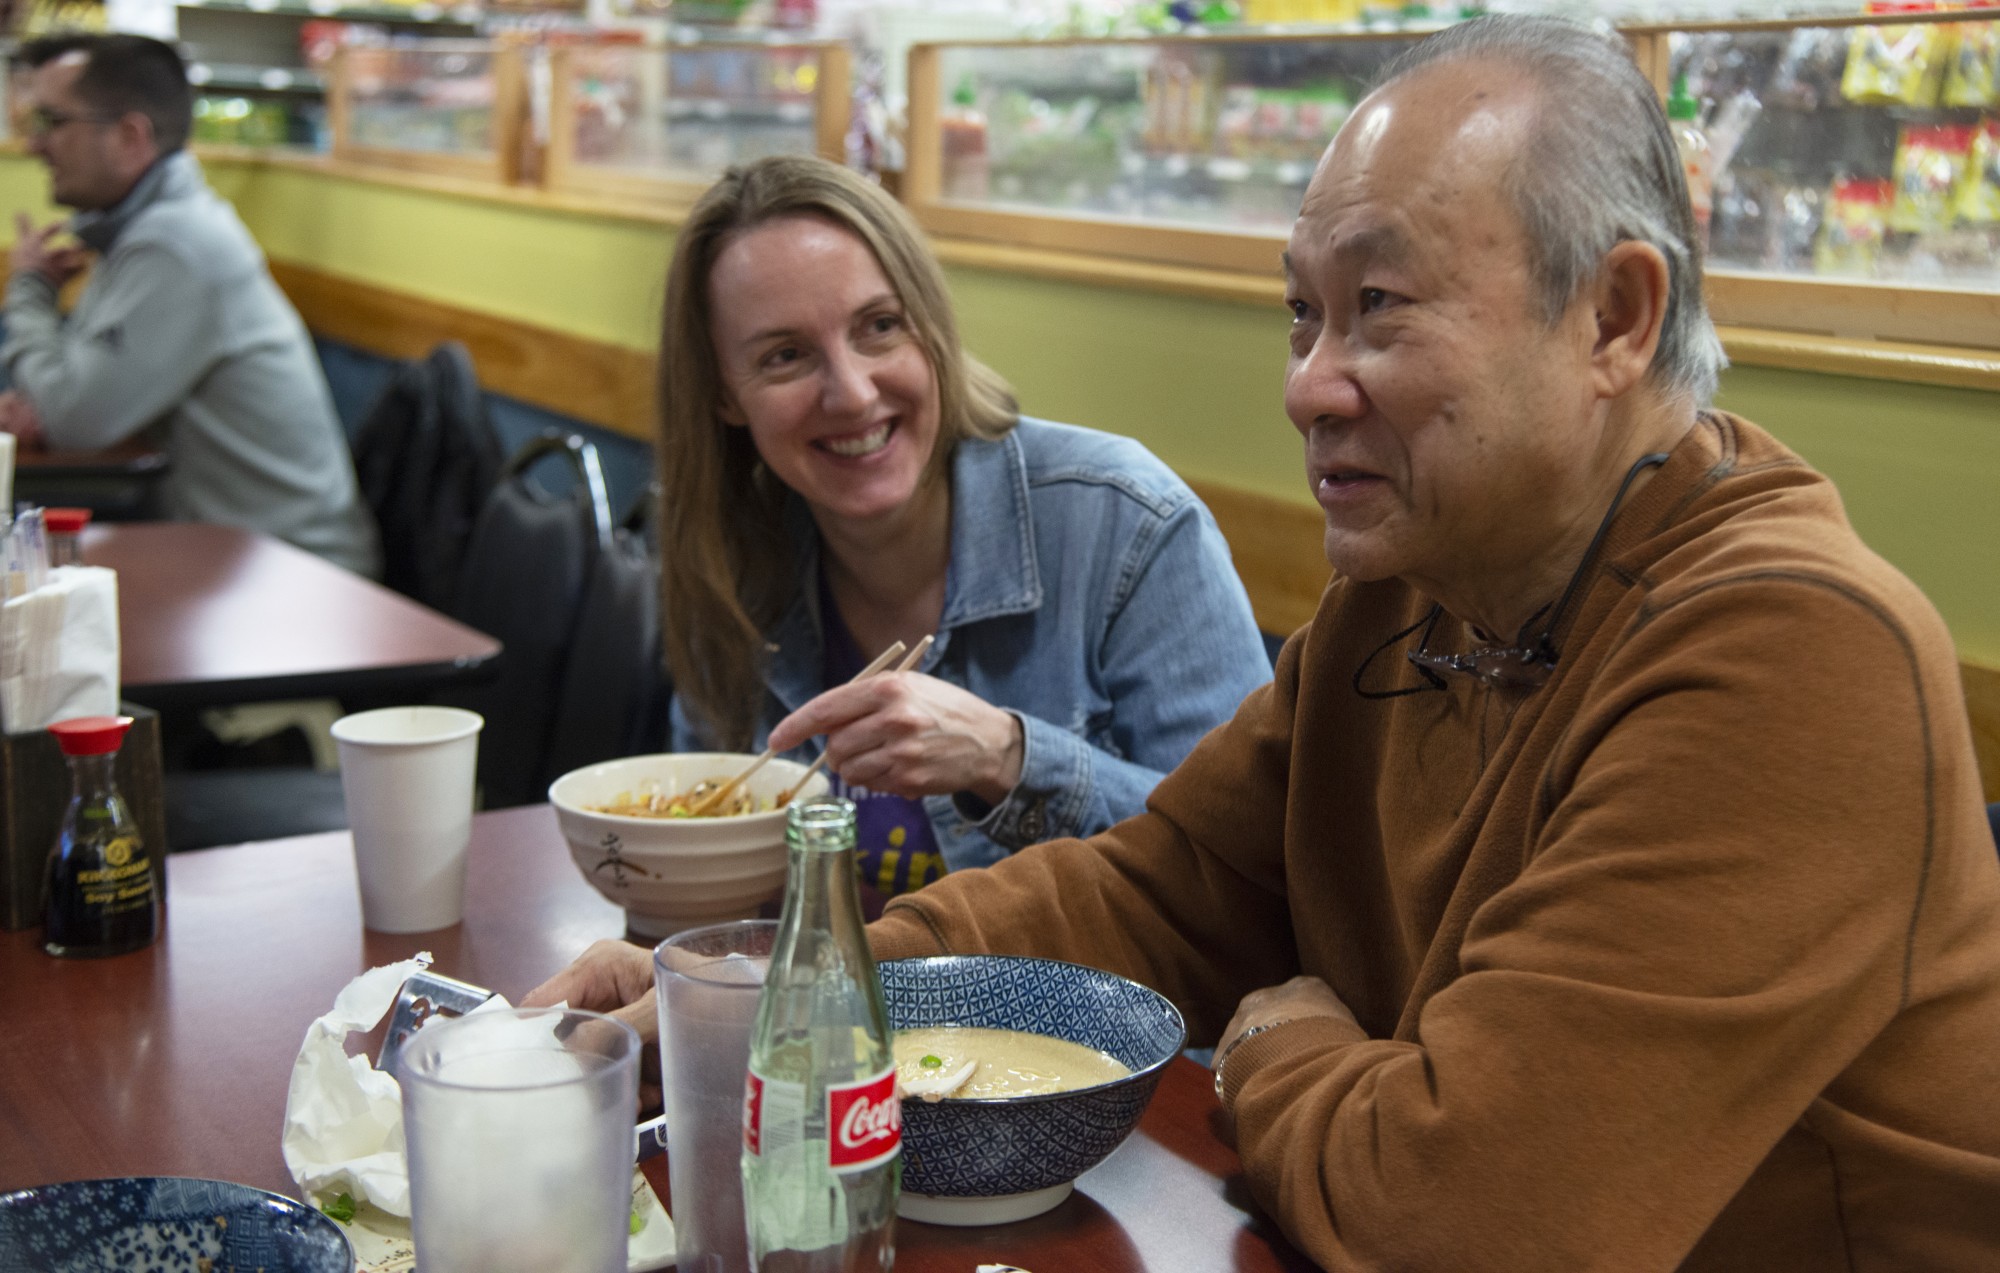 United Noodles co-owner Annie Dingle, left, and the markets founder and former owner, Ramon Tan, right, eat ramen from the Unideli ramen shop located inside of United Noodles on Thursday, Jan. 30. 